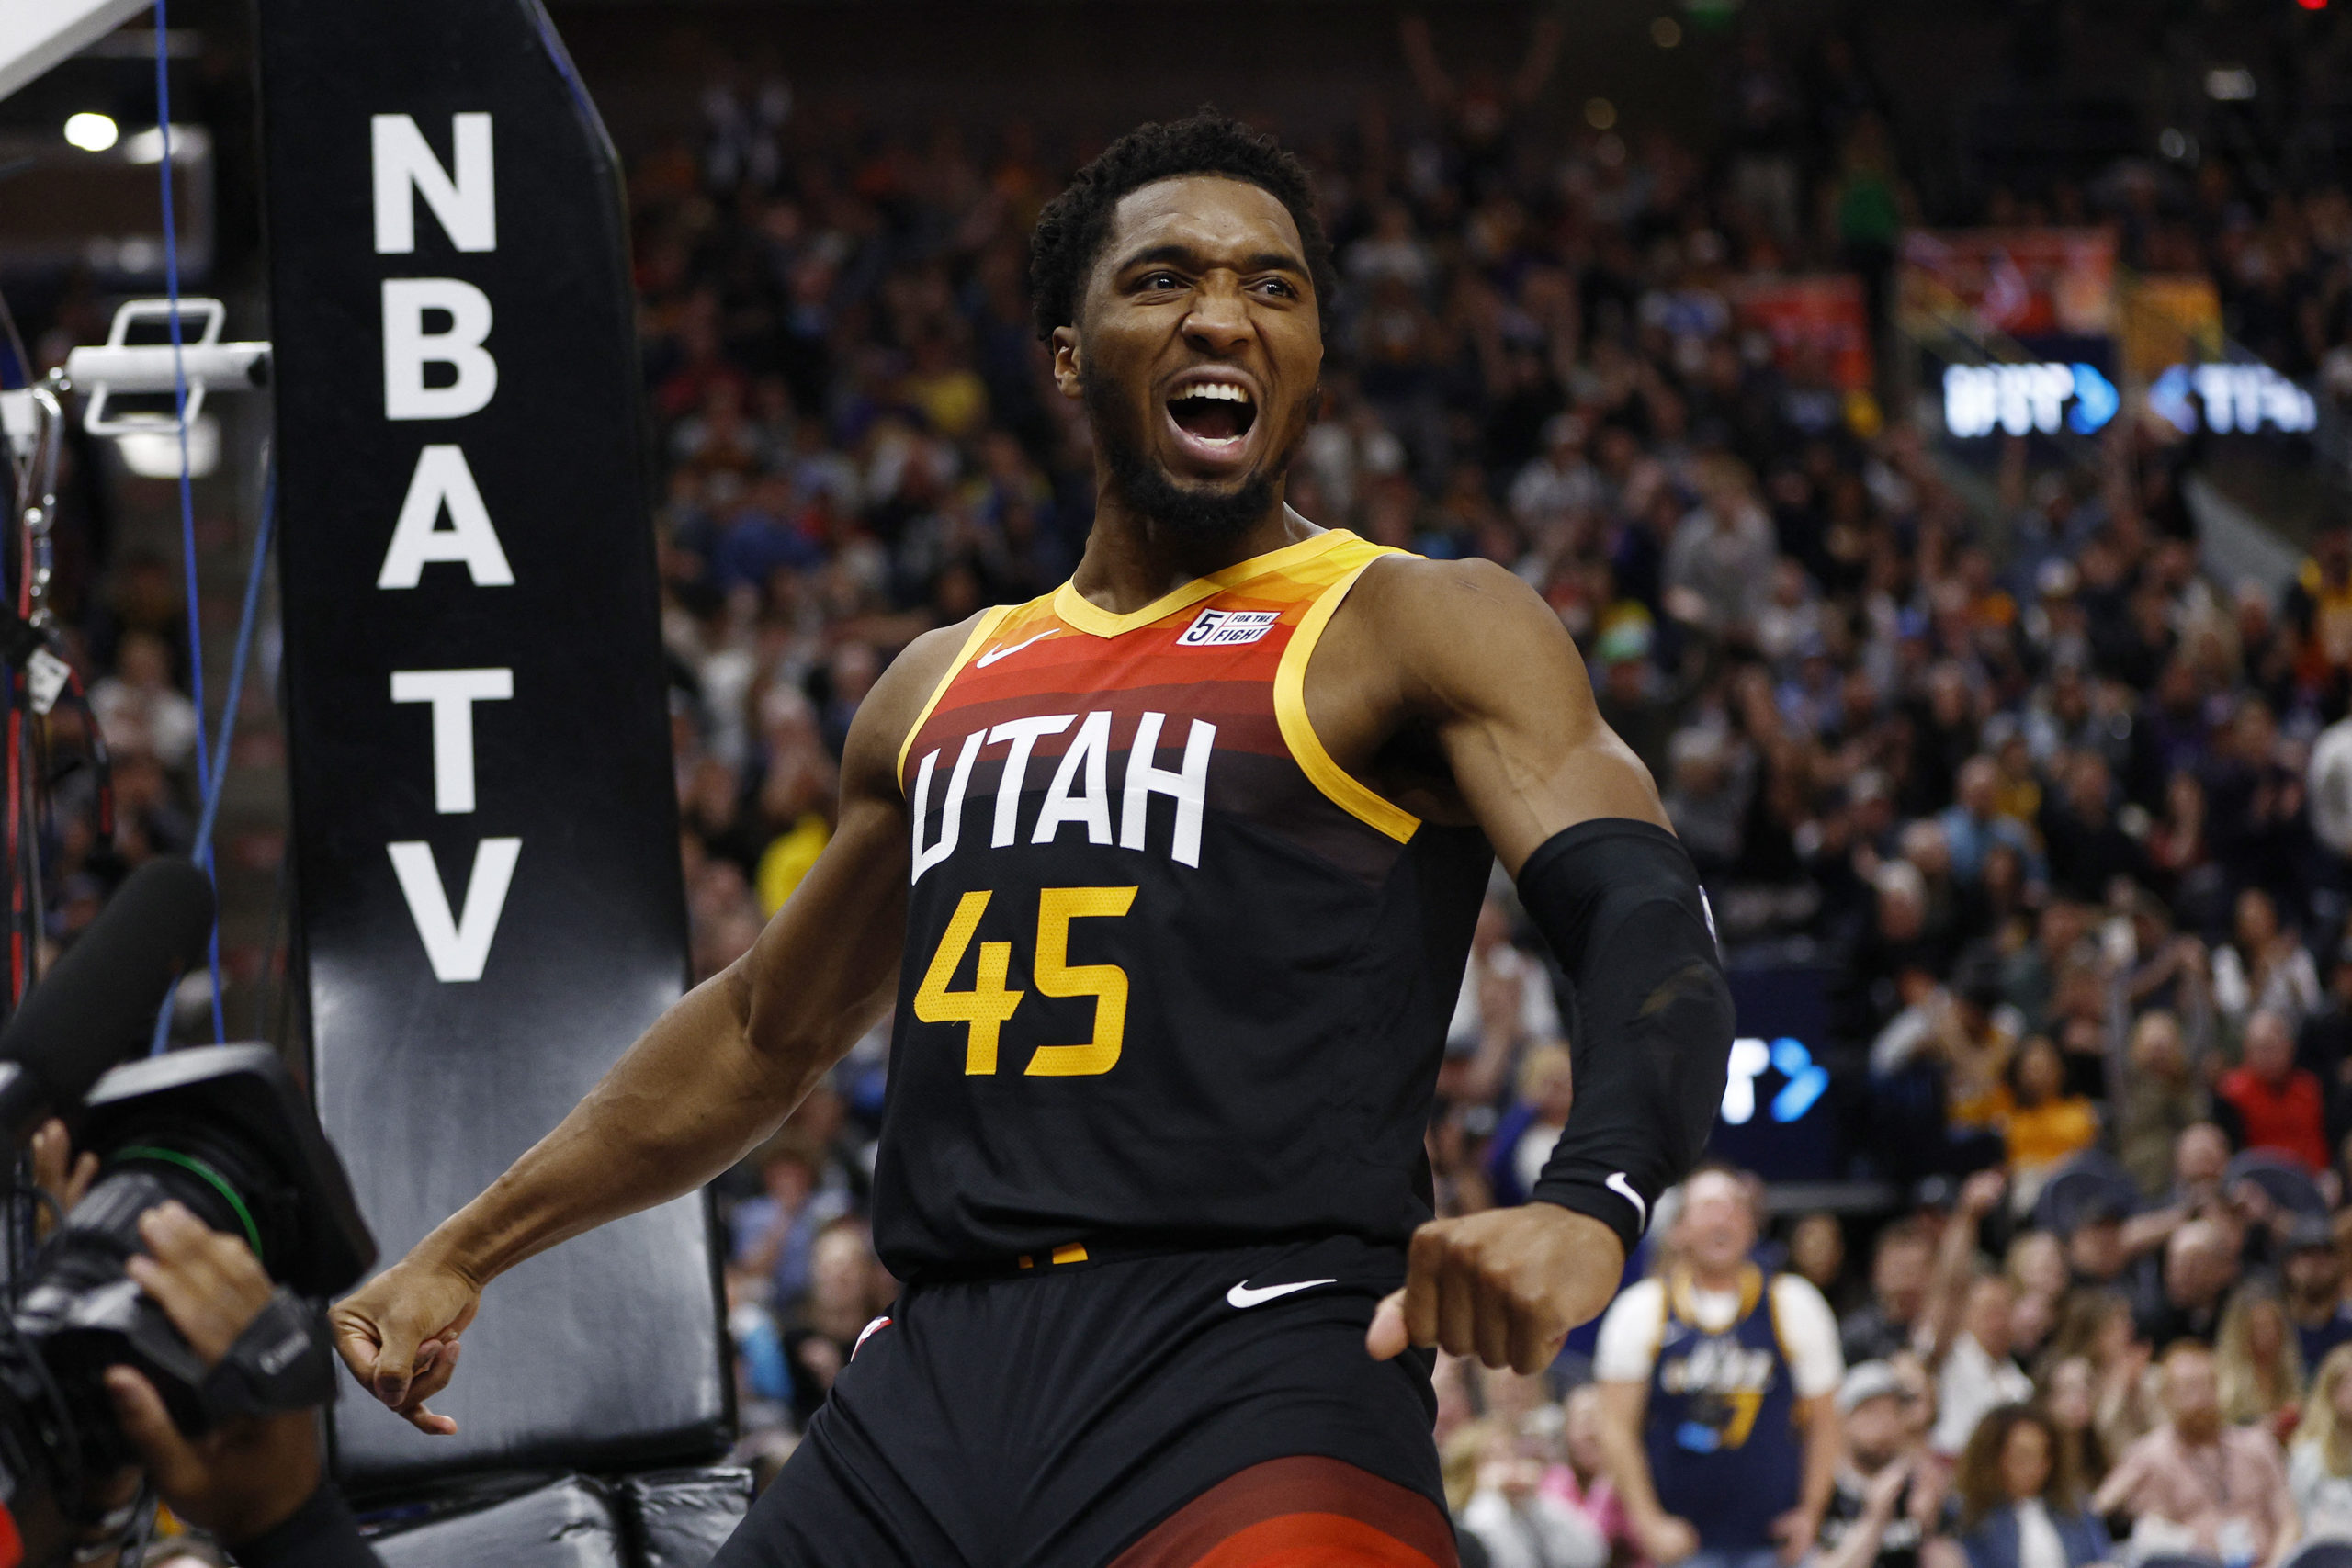 Utah Jazz guard Donovan Mitchell (45) reacts after dunking the ball in the fourth quarter against the Los Angeles Lakers at Vivint Arena.